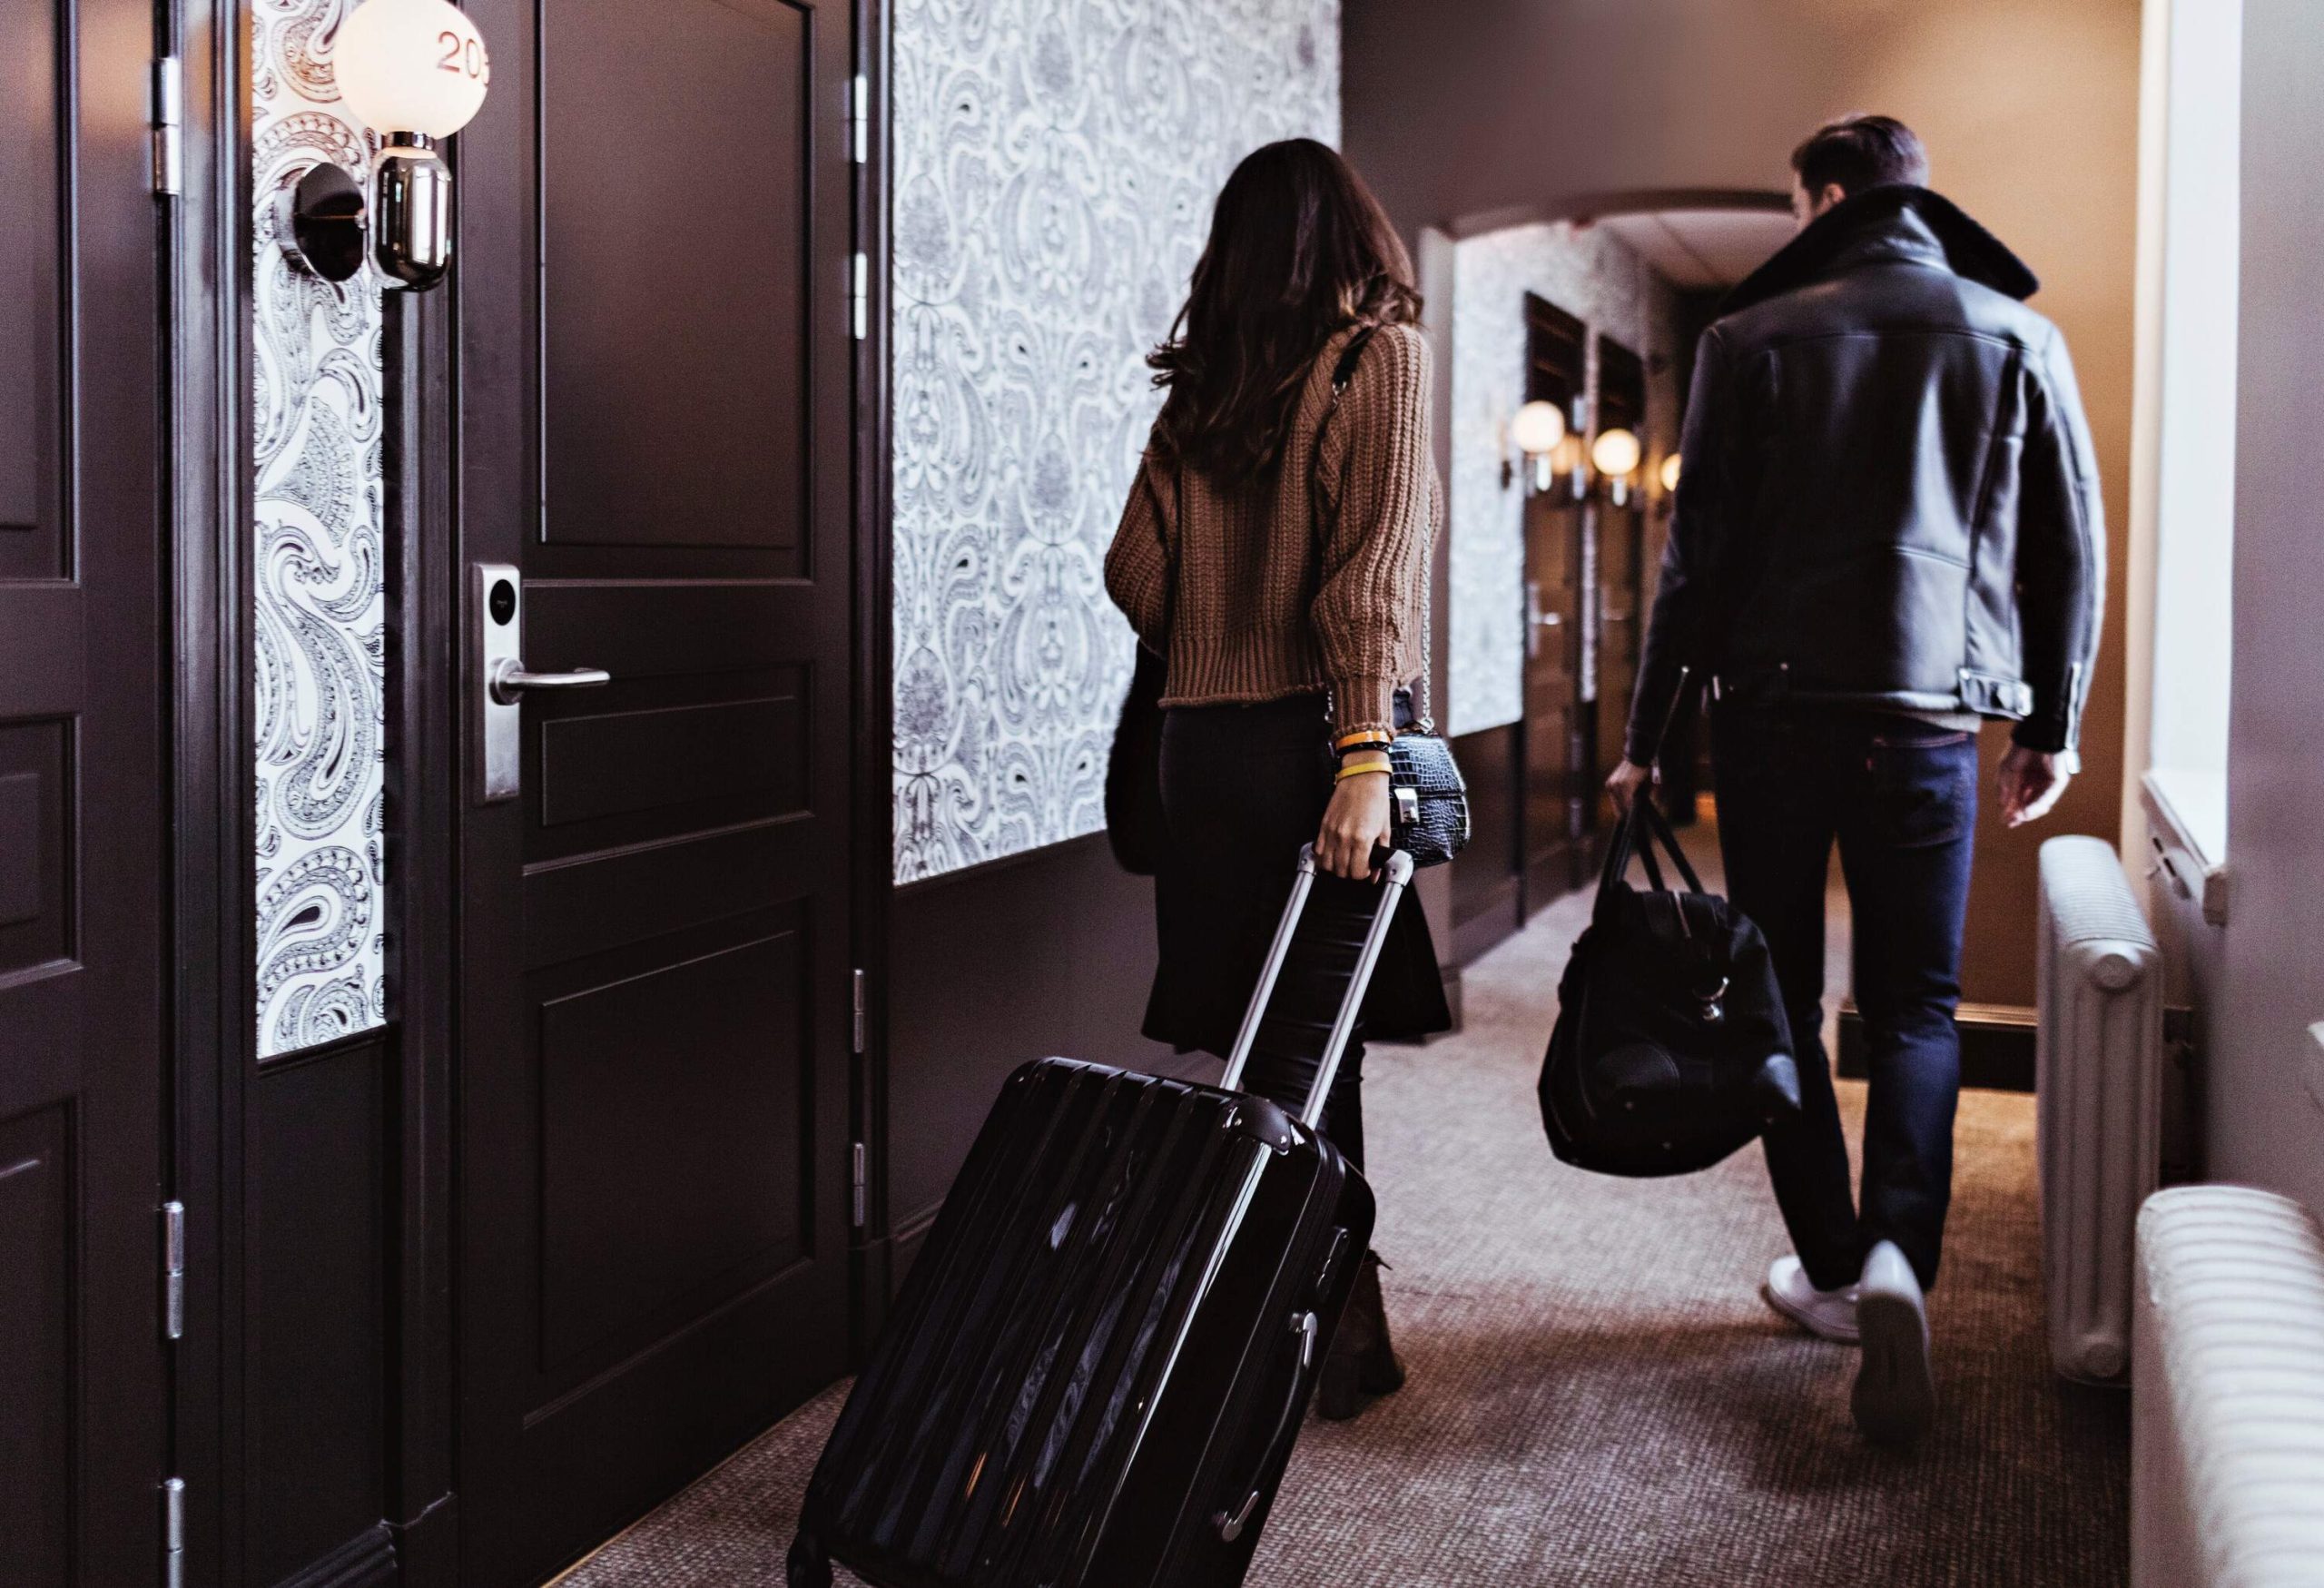 theme_travel_hotel_corridor_rooms_people_couple_walking_luggage_gettyimages-1241453705